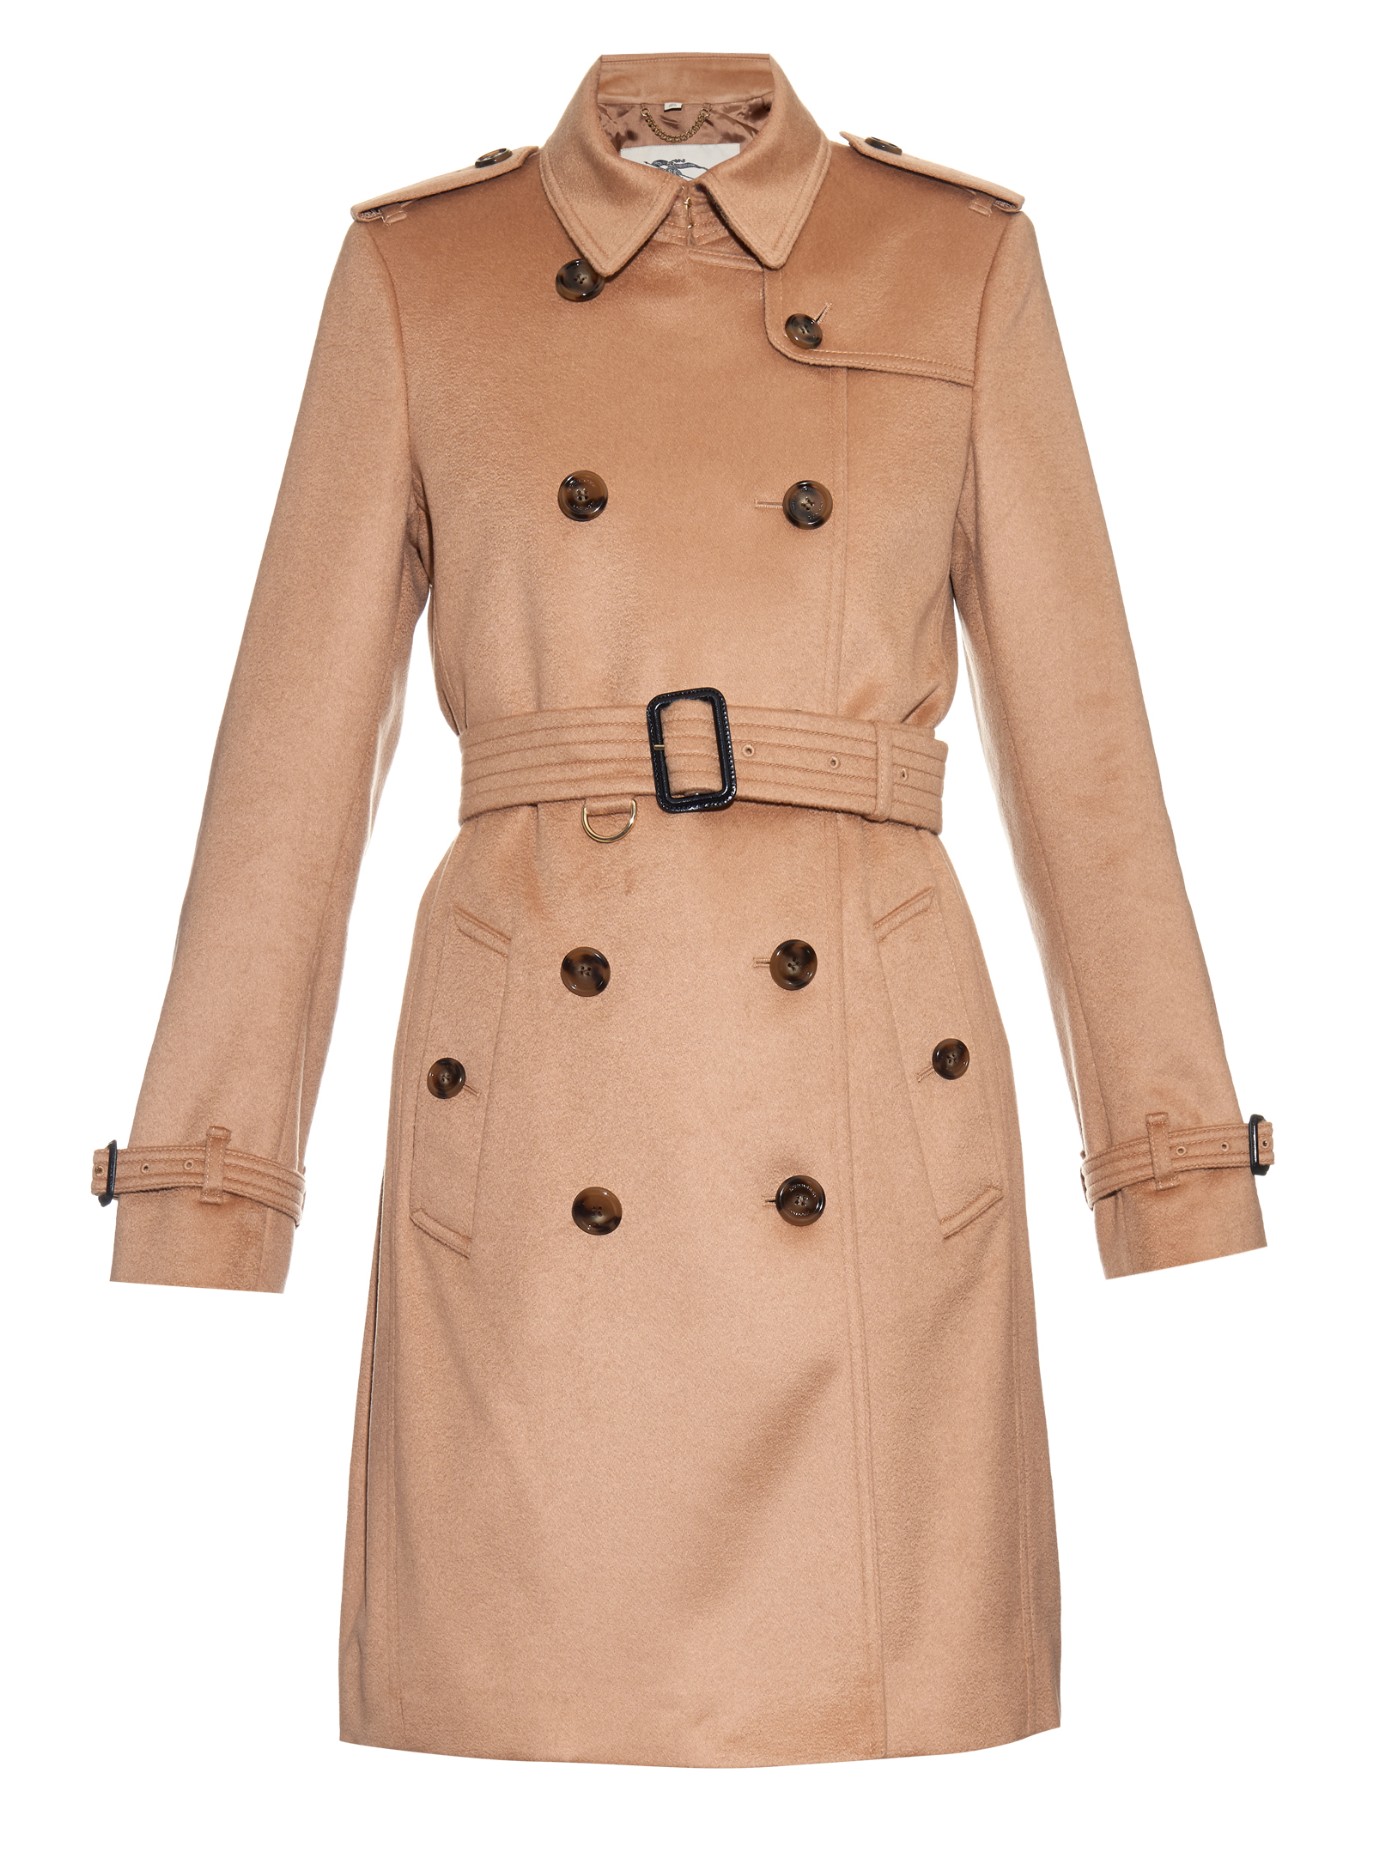 Shopping: More Coats, Jackets & Capes for Autumn Days